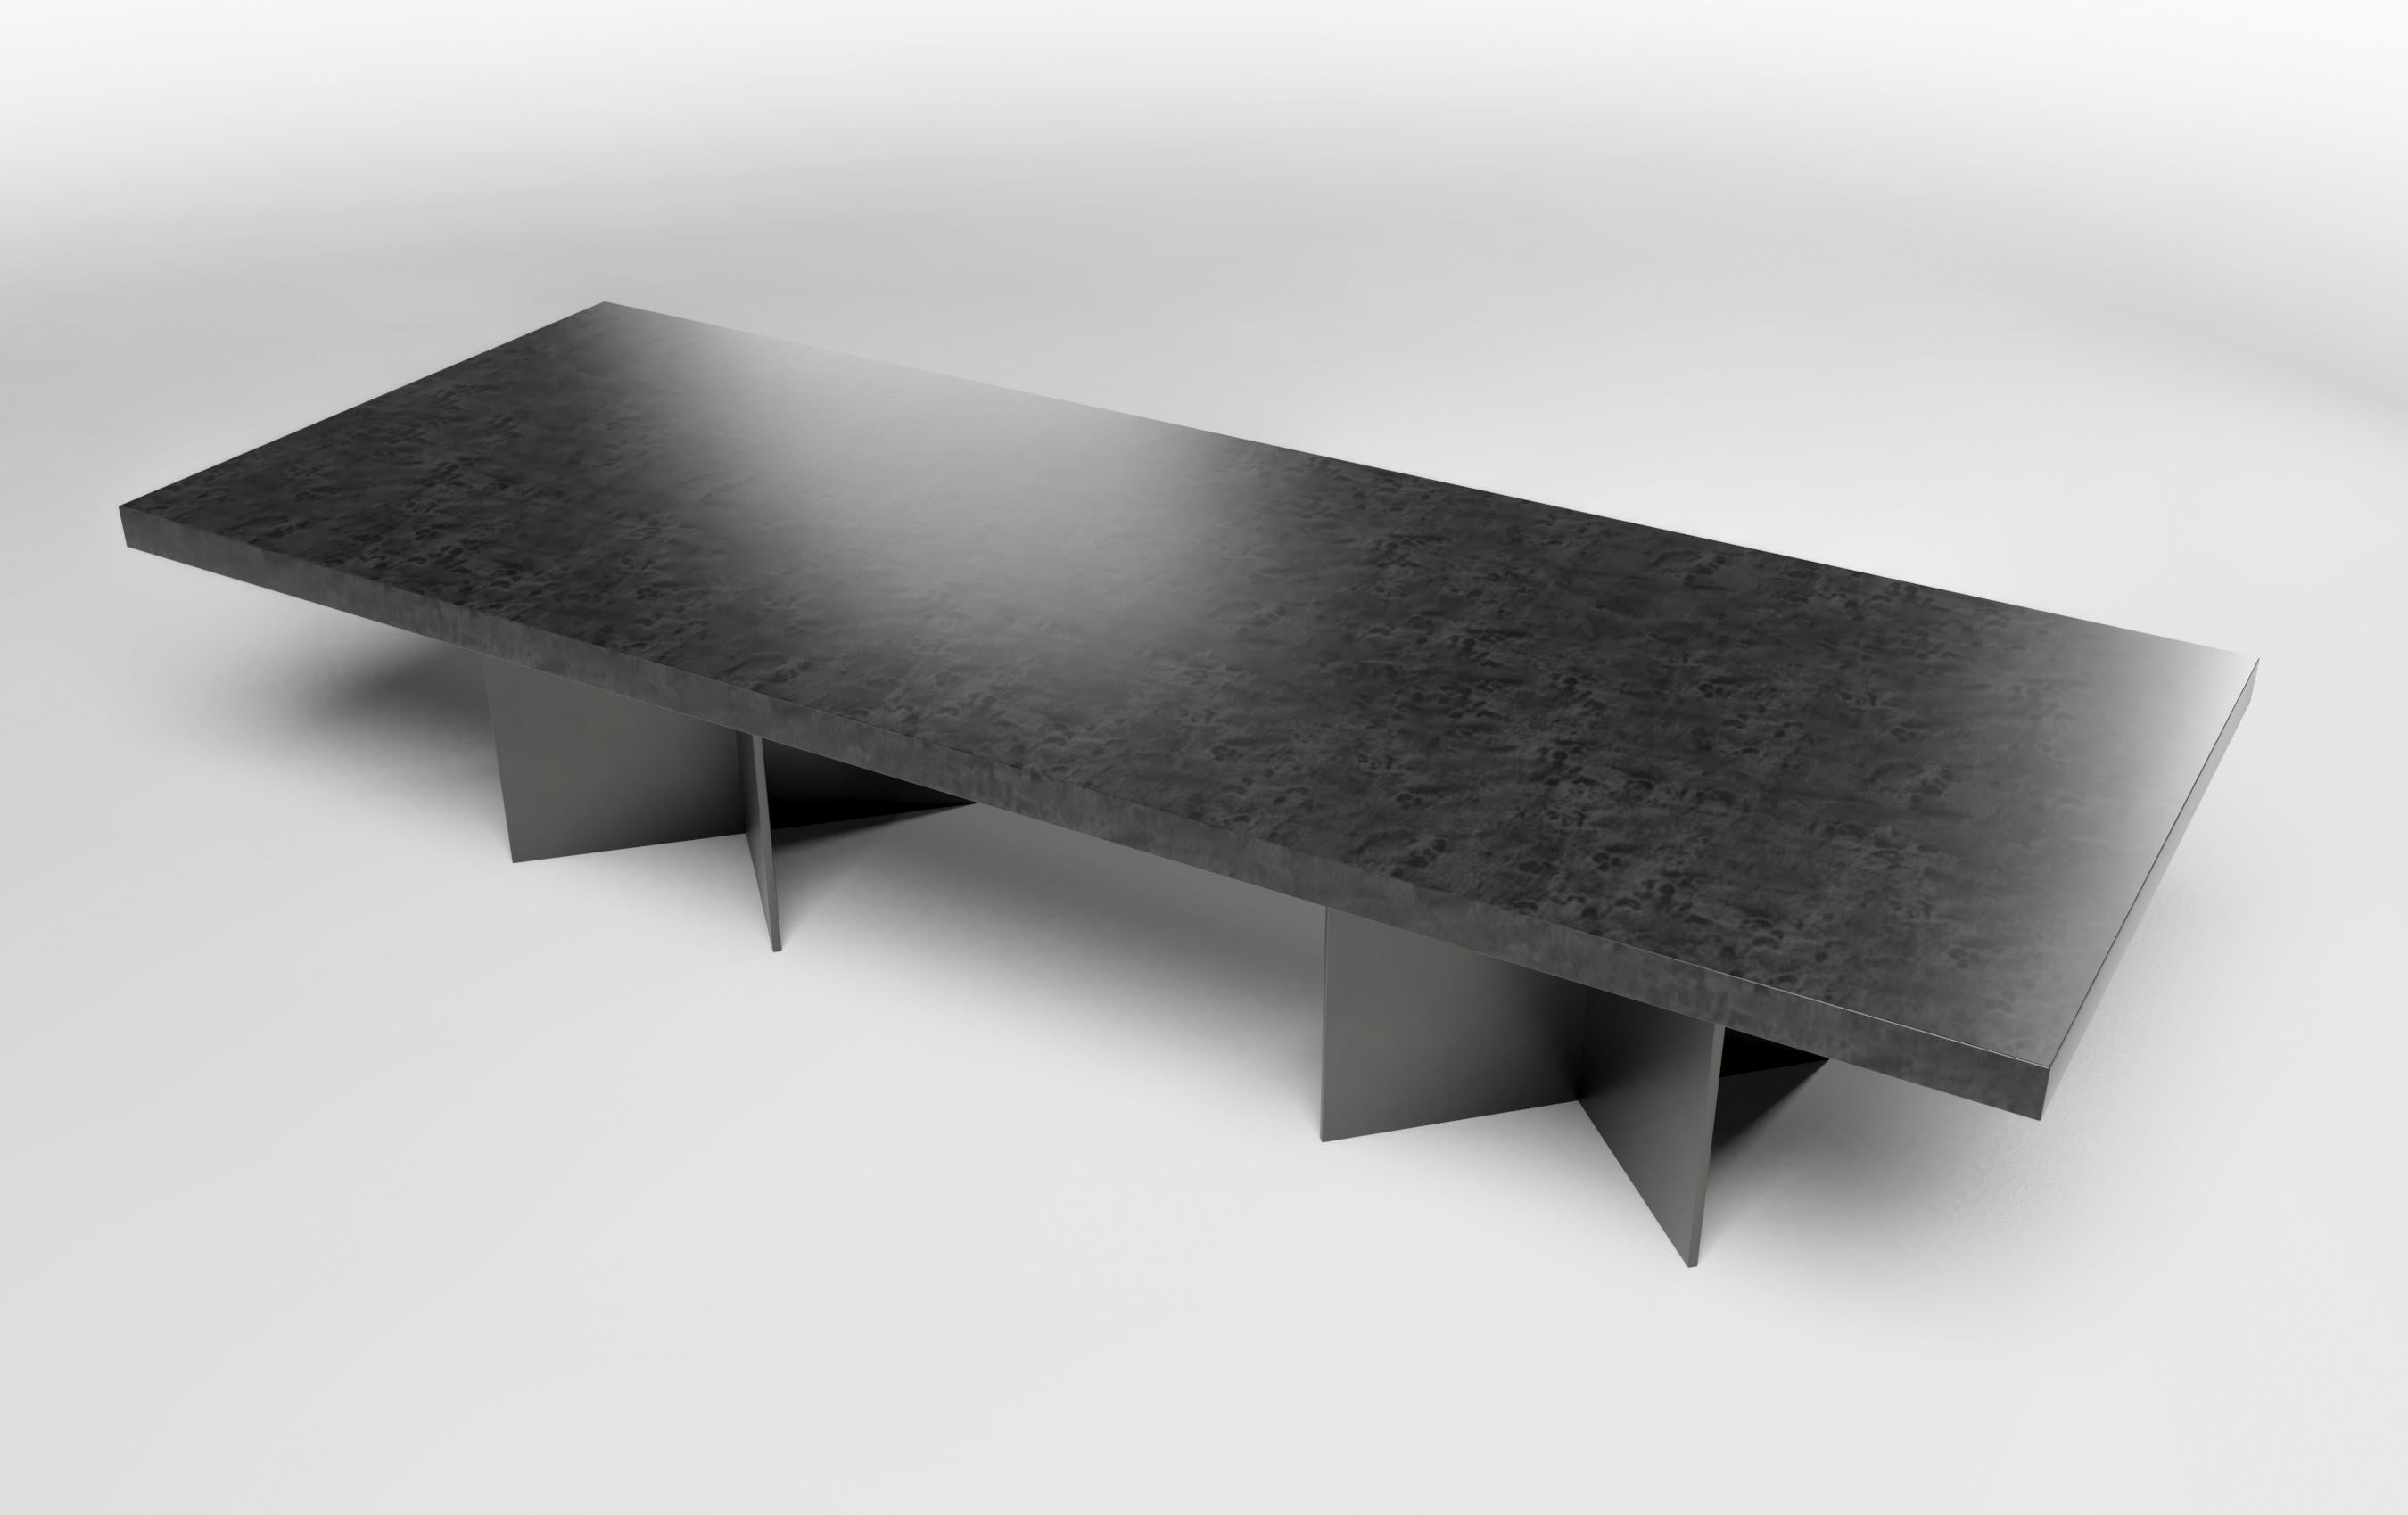 This beautifully designed iconic dining table utilizes a clean modern aesthetic and distinctive base to separate itself from the ordinary. Ortiz Milano's Creative Director Susan Hornbeak Ortiz has created a masterpiece from her new Ortiz Milano